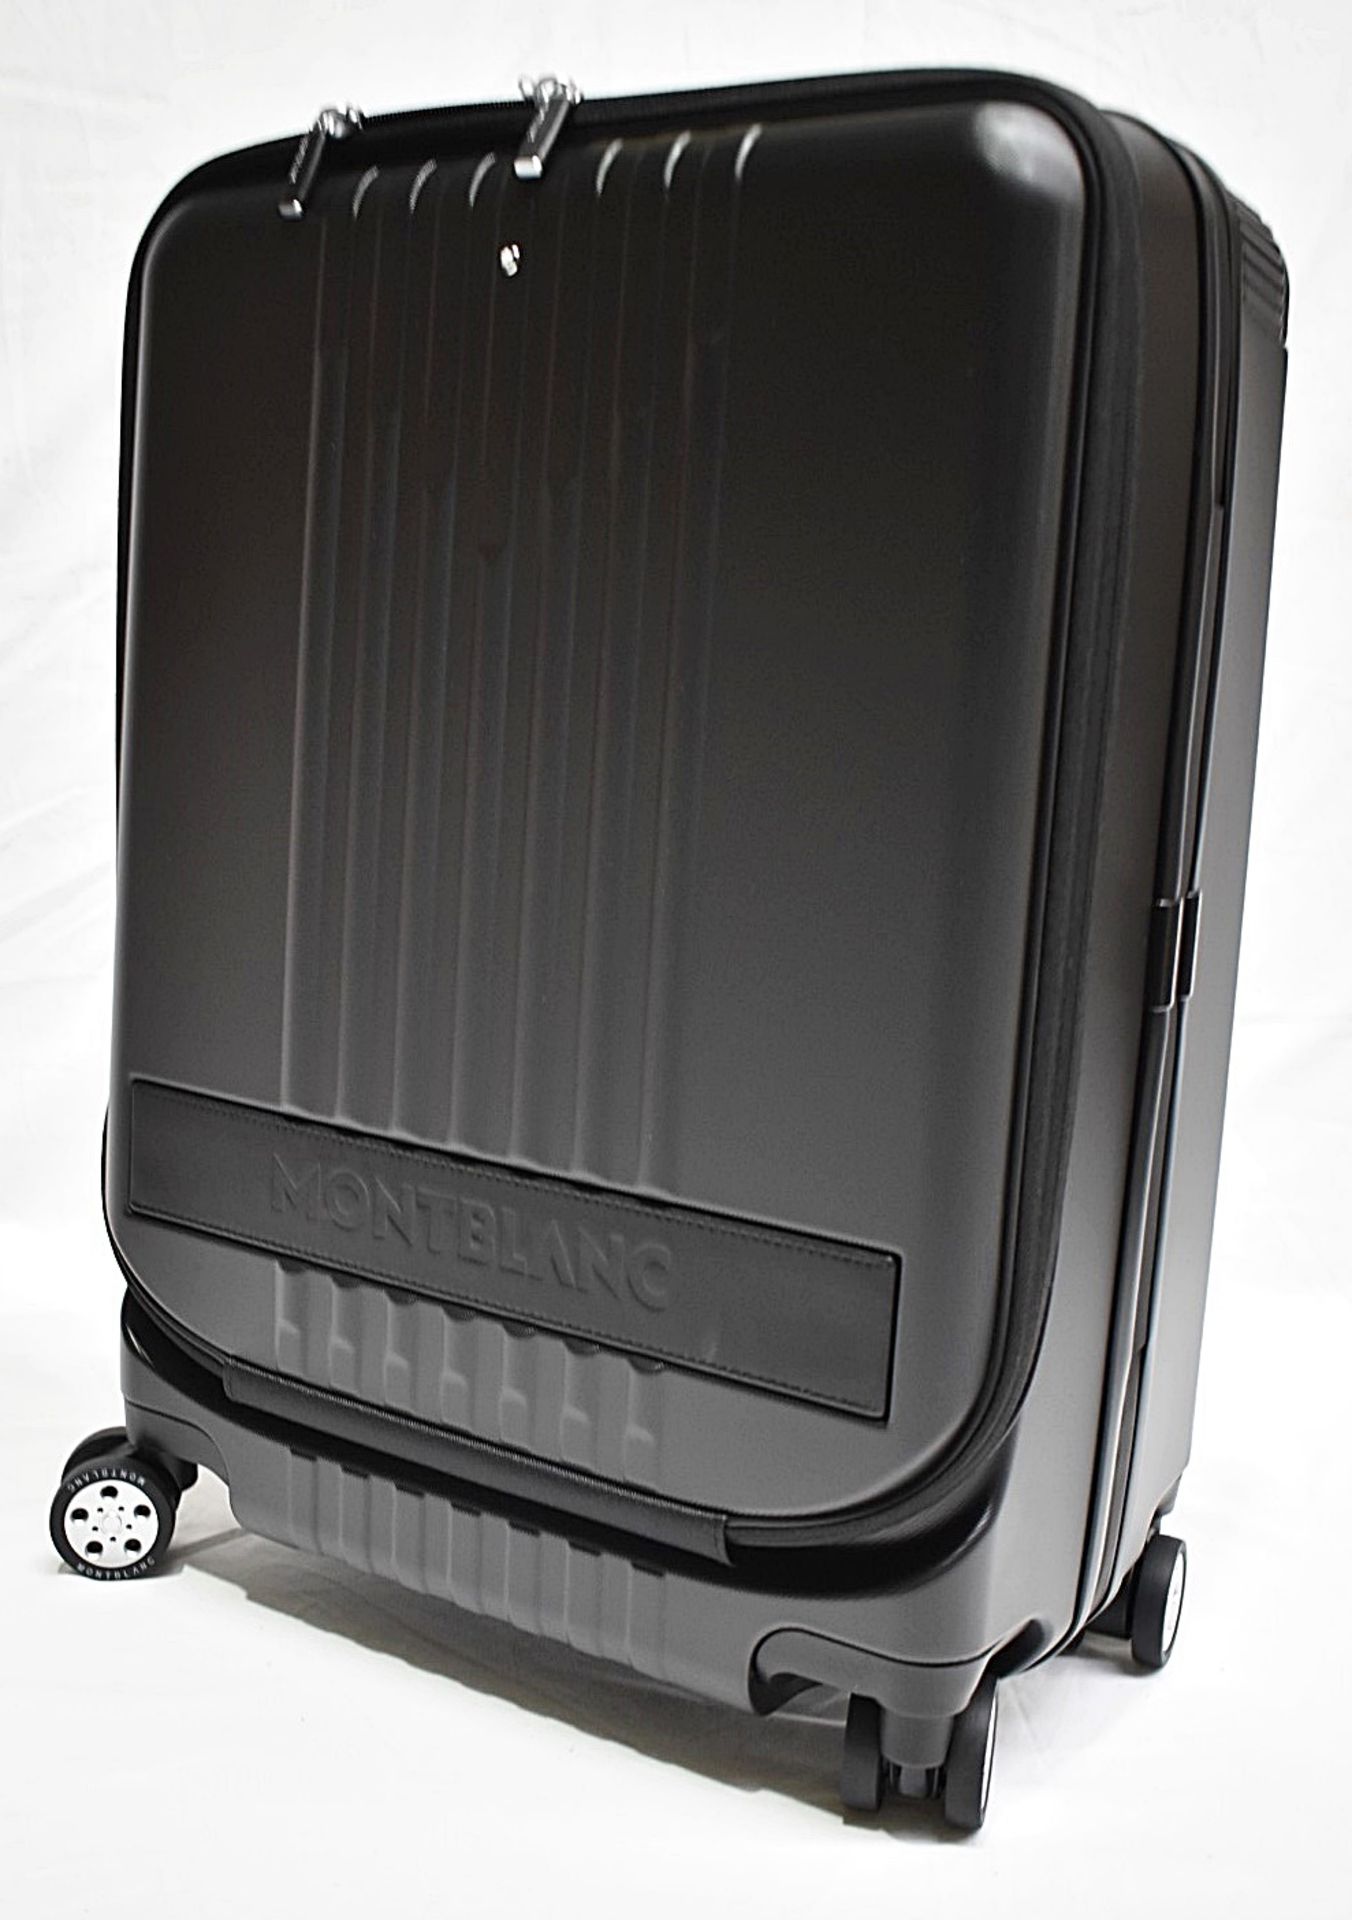 1 x MONTBLANC Polycarbonite Hand Luggage Cabin Trolley (55cm) - Original RRP £690.00 - Image 13 of 26